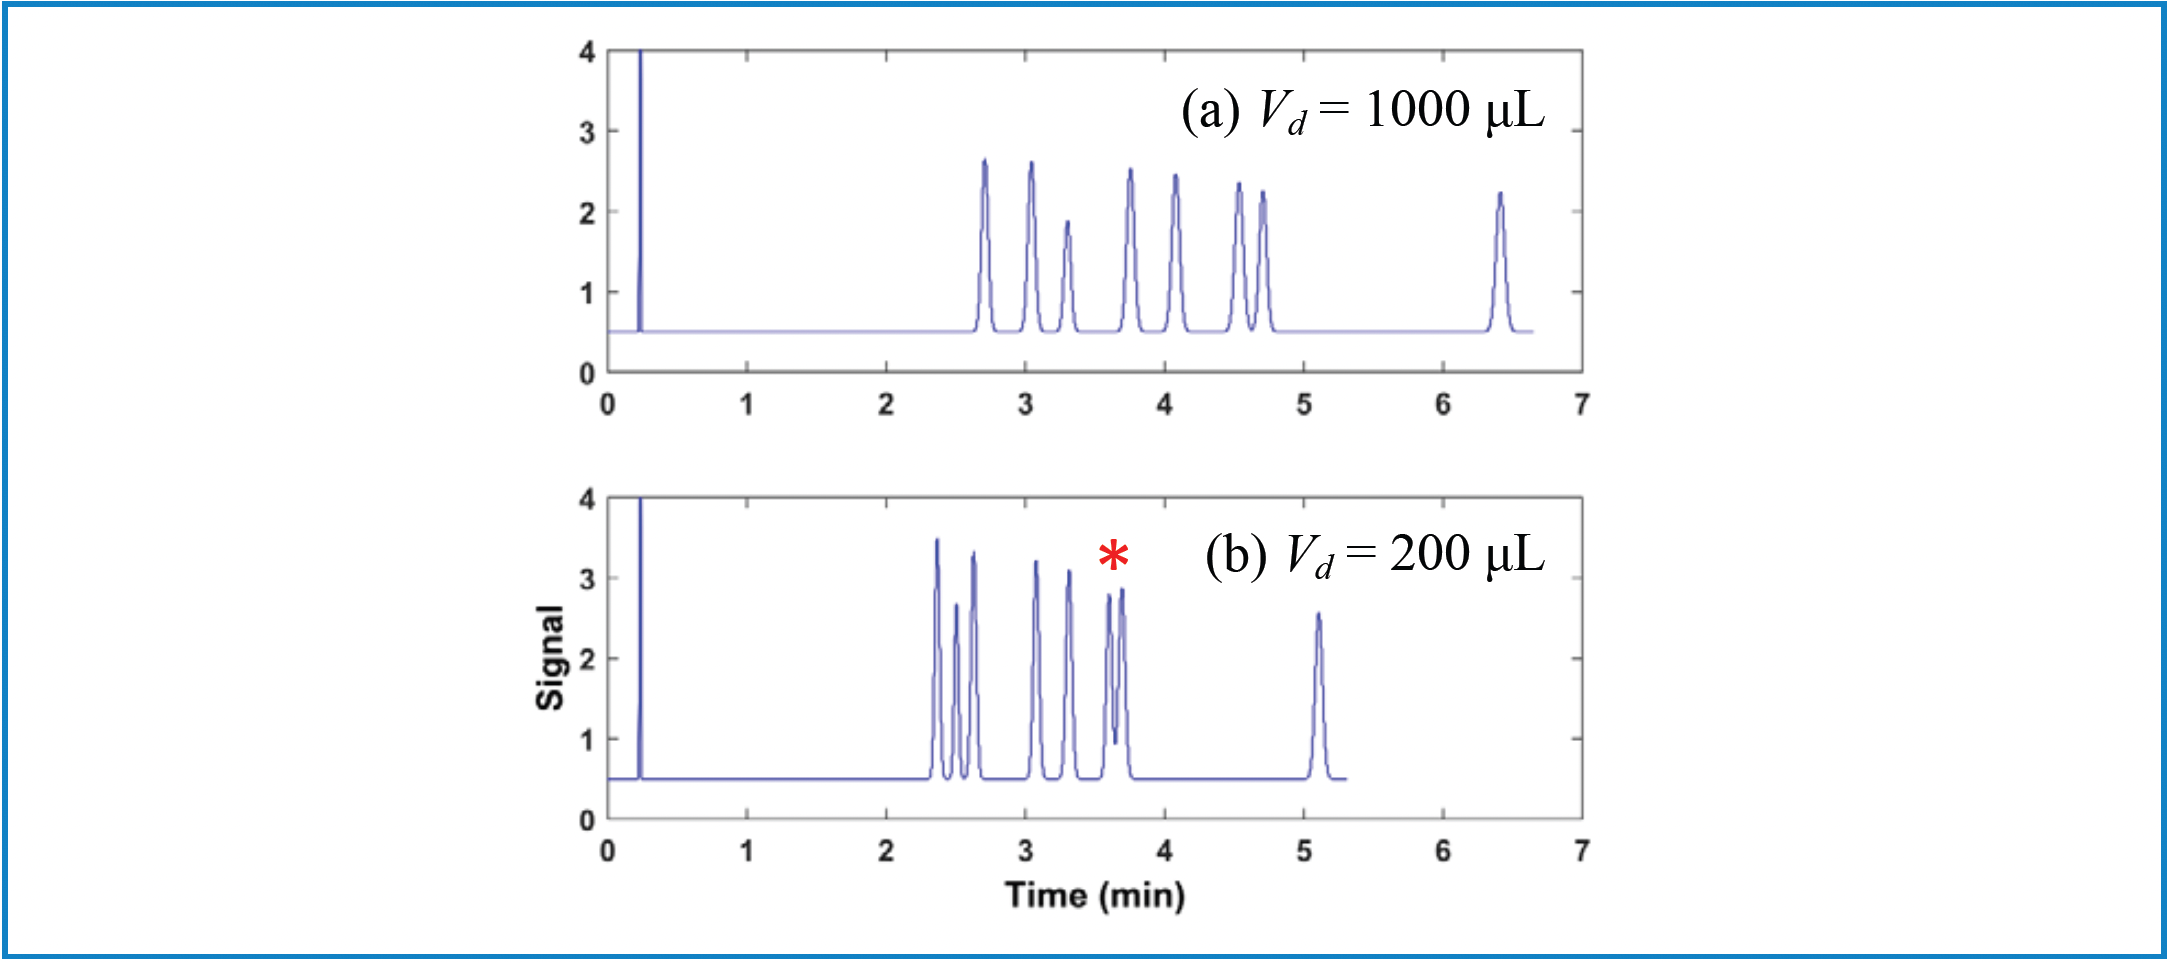 FIGURE 2: (a) Vd = 1000 μL and (b) Vd = 200 μL. Comparison of chromatograms obtained on systems with different GDVs, but with a method that had been developed using the system with the larger GDV. Conditions are the same as in Figure 1, except that the gradient was 15 40% B from 0–6.5 min.